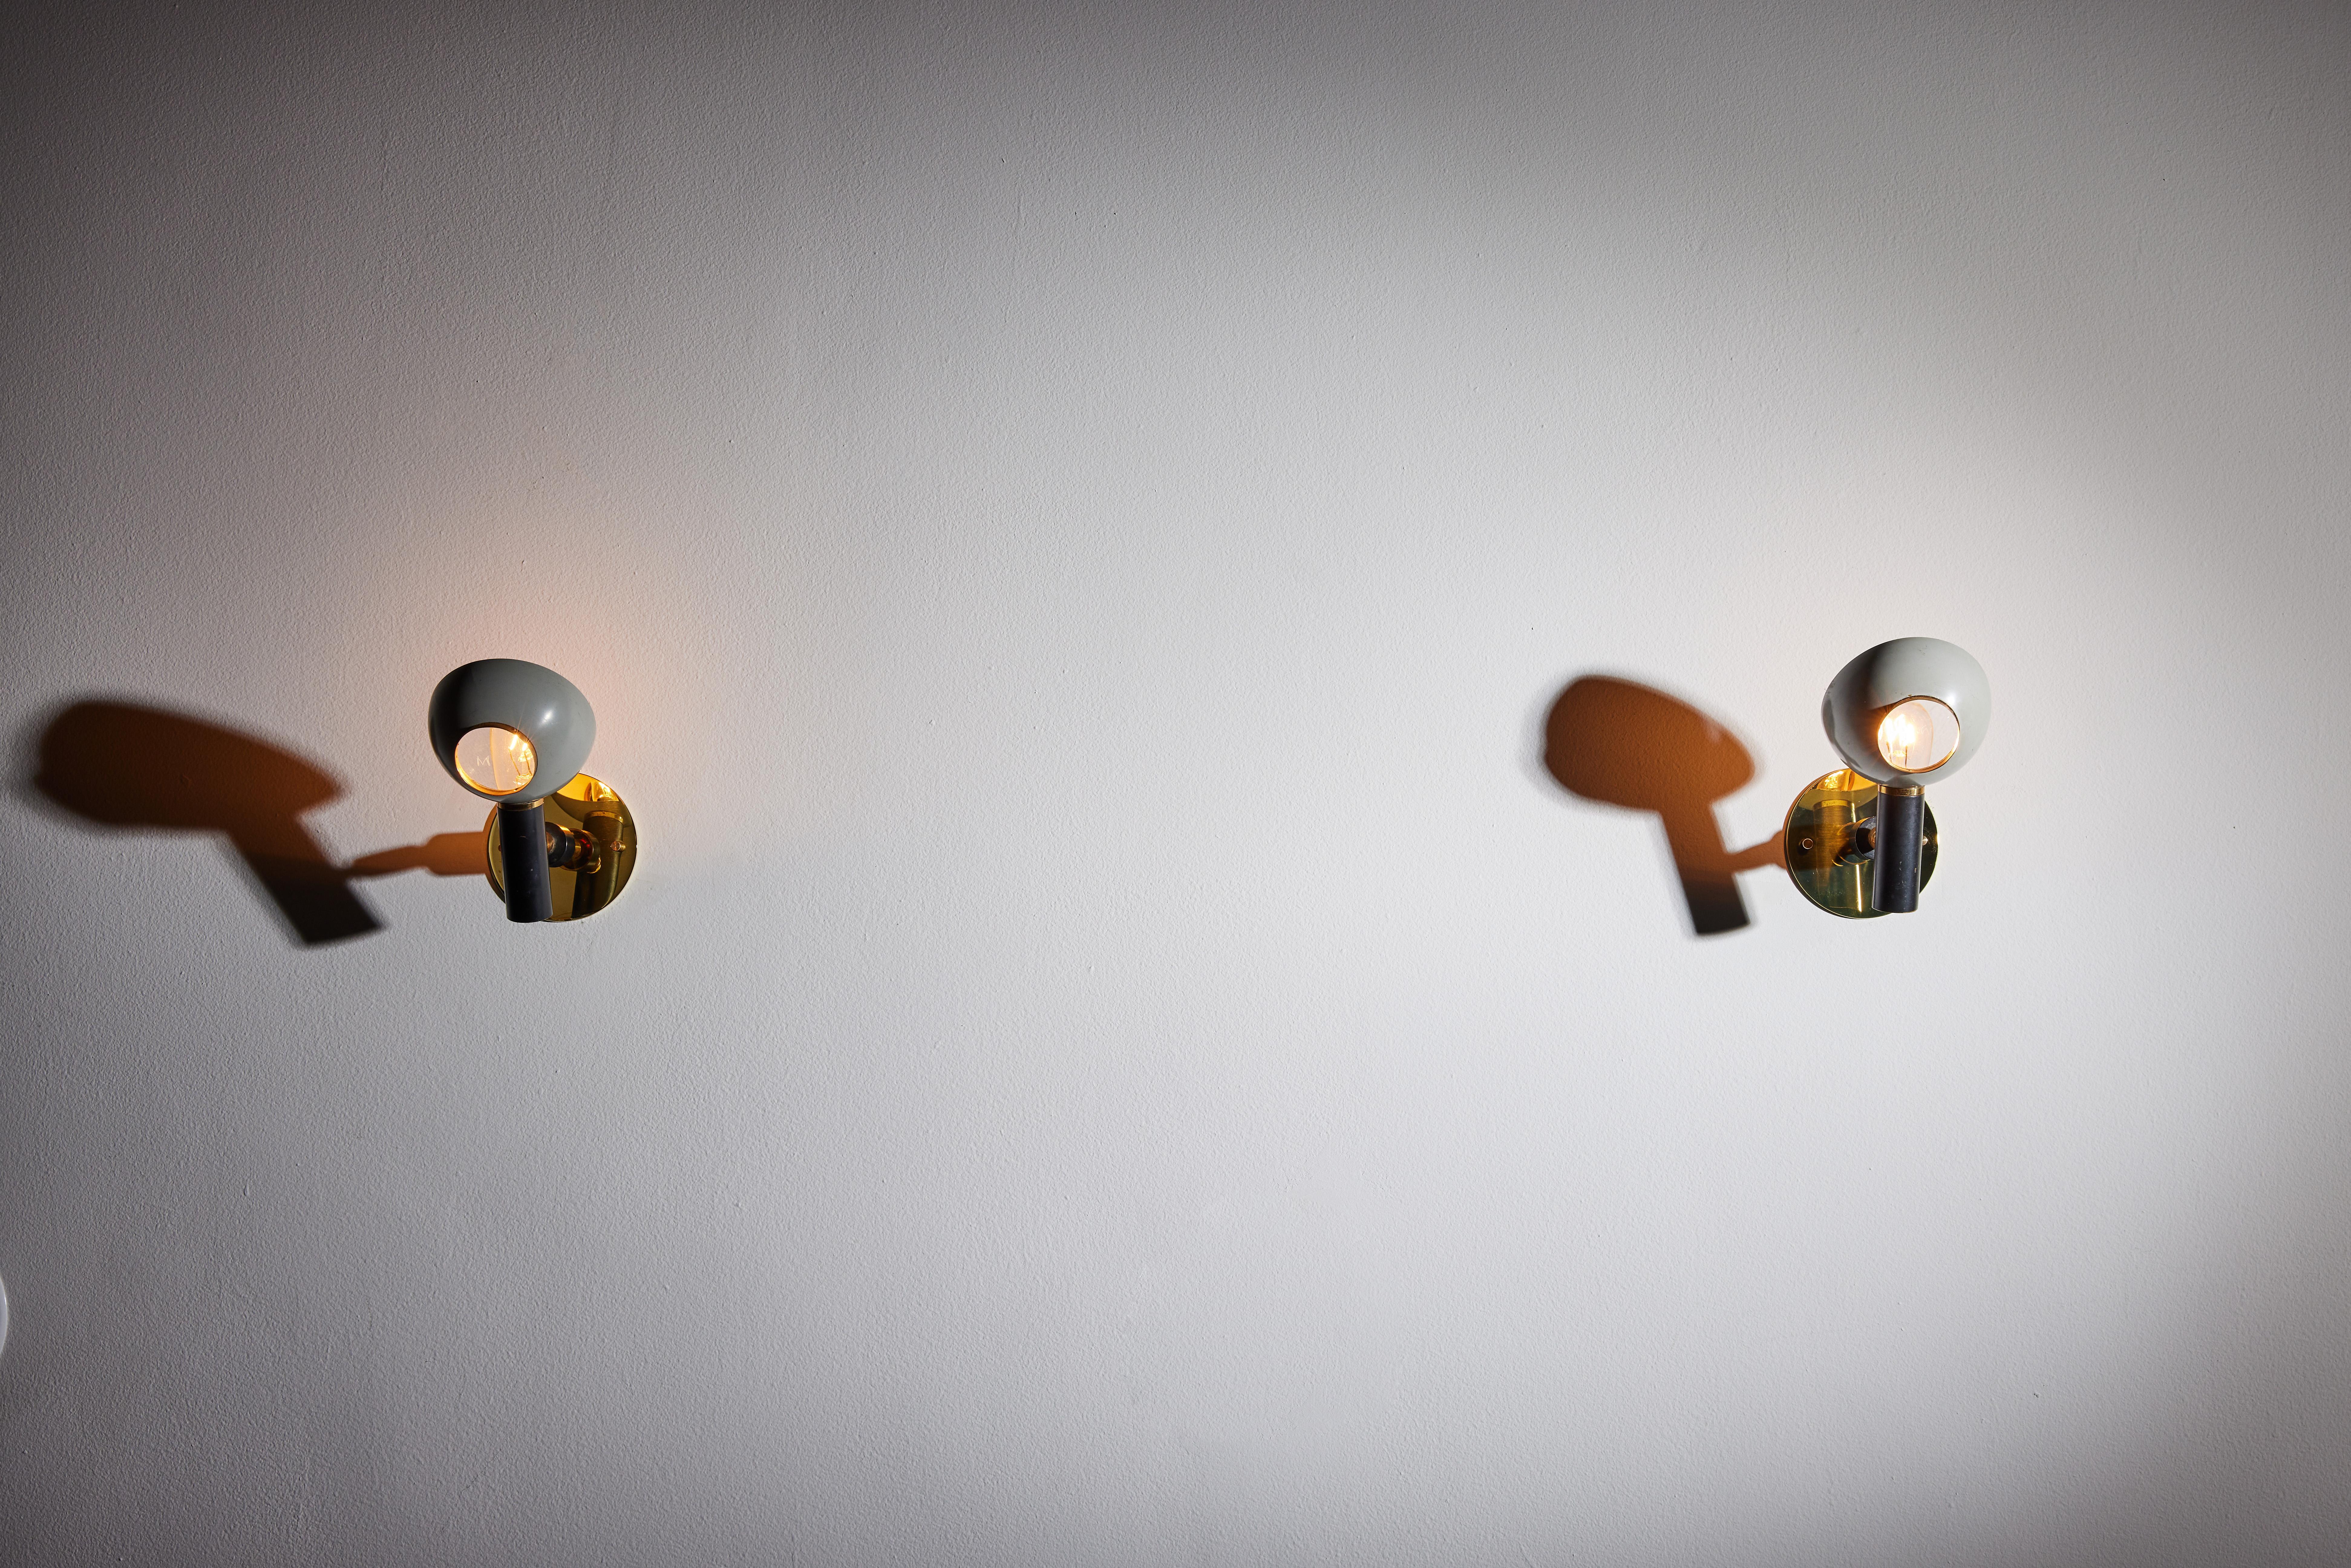 Pair of sconces by Oscar Torlasco for Lumi. Designed and manufactured in Italy, circa 1950s. Painted aluminum, metal and brass. Rewired for U.S. standards. Shades adjust to various positions. We recommend one E14 candelabra 40w maximum bulb per